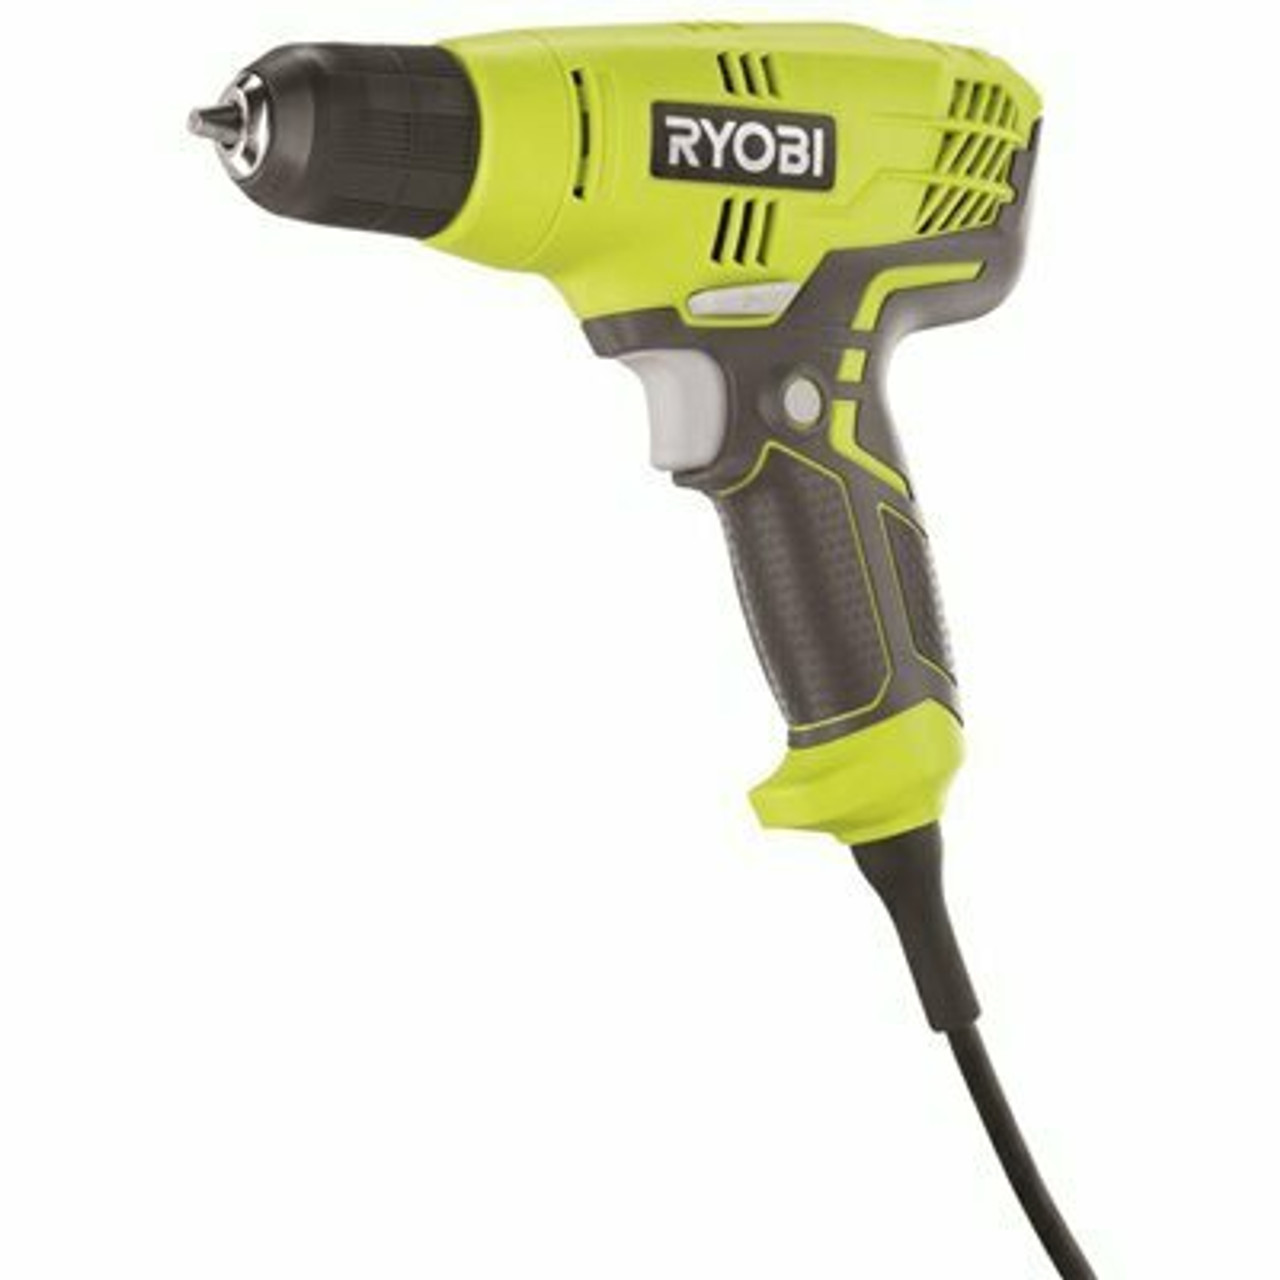 Ryobi 5.5 Amp Corded 3/8 In. Variable Speed Compact Drill/Driver With Bag